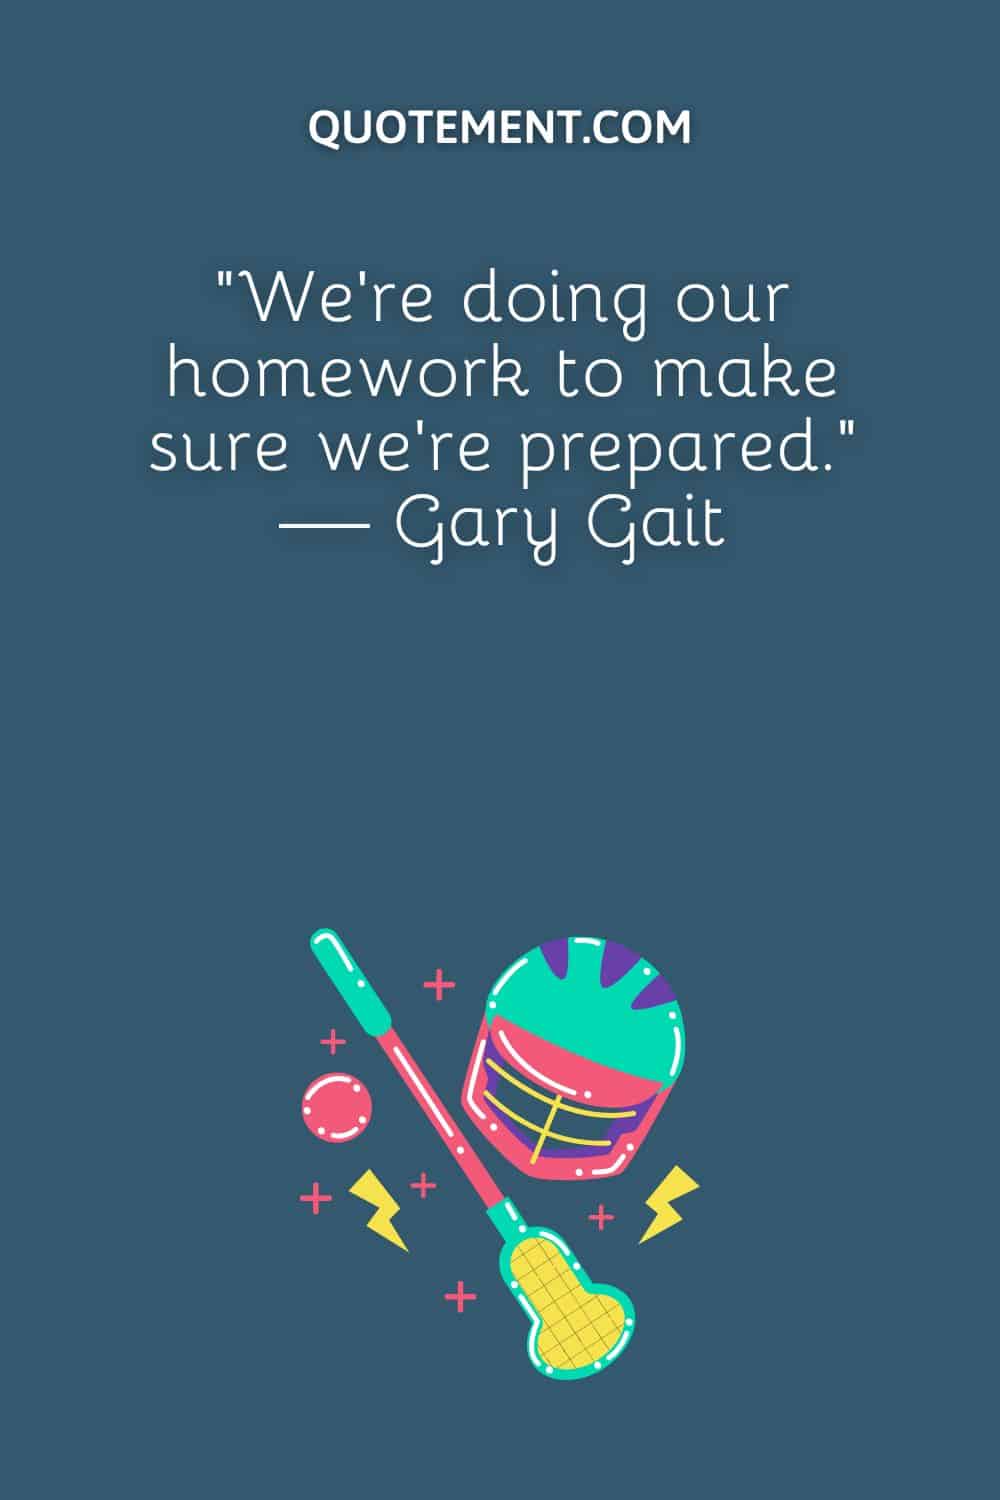 We're doing our homework to make sure we're prepared. — Gary Gait